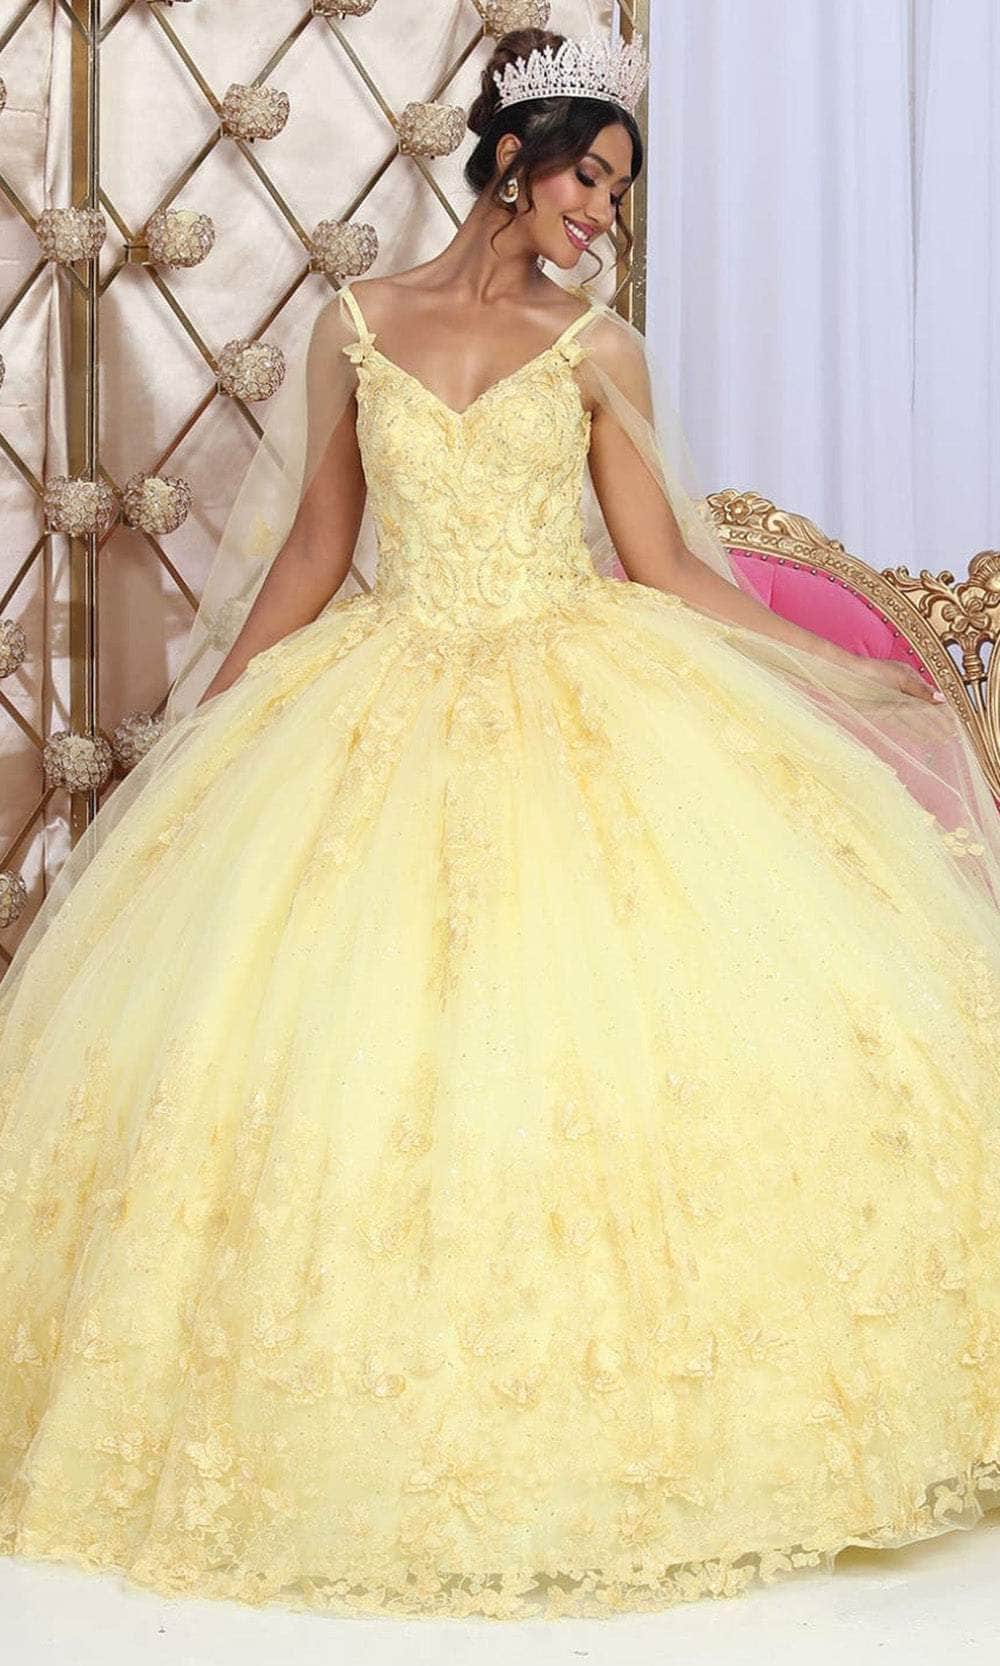 May Queen LK226 - Embroidered V-Neck Ballgown Quinceanera Dresses 4 / Yellow